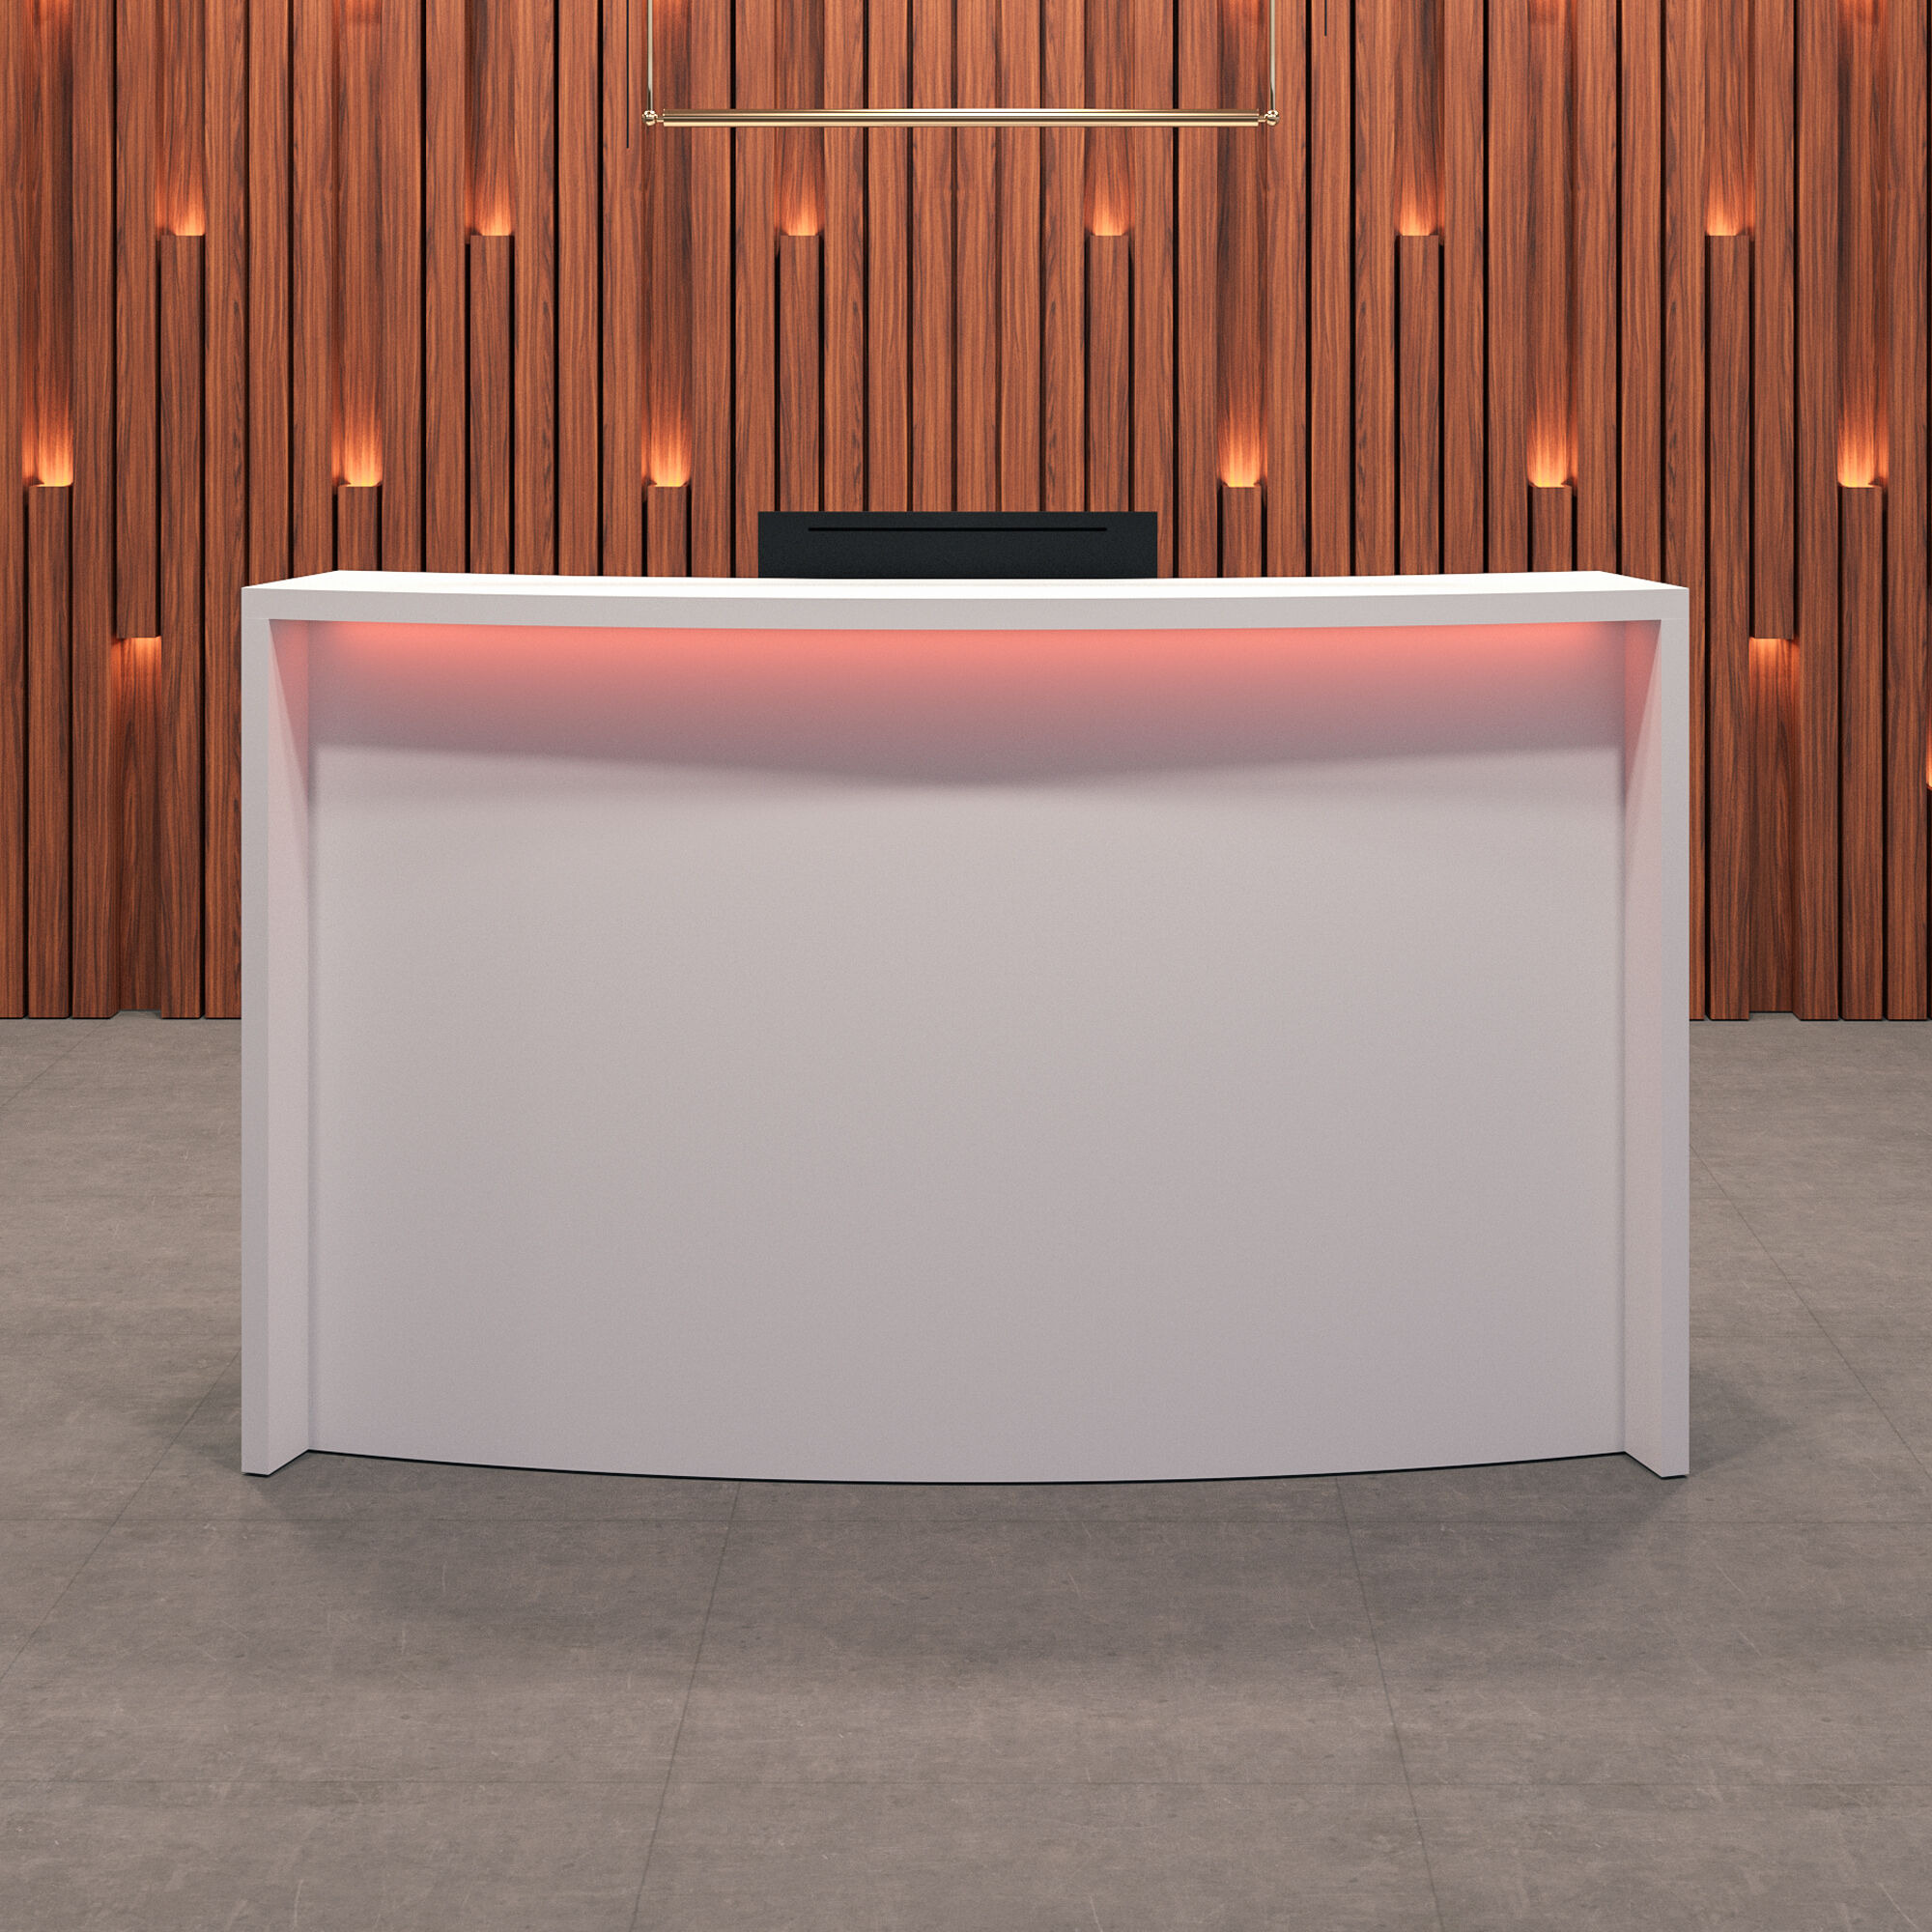 72-inch Seattle X1 Custom Reception Desk in white gloss laminate desk and curved front panel, with multi-colored LED, shown here.